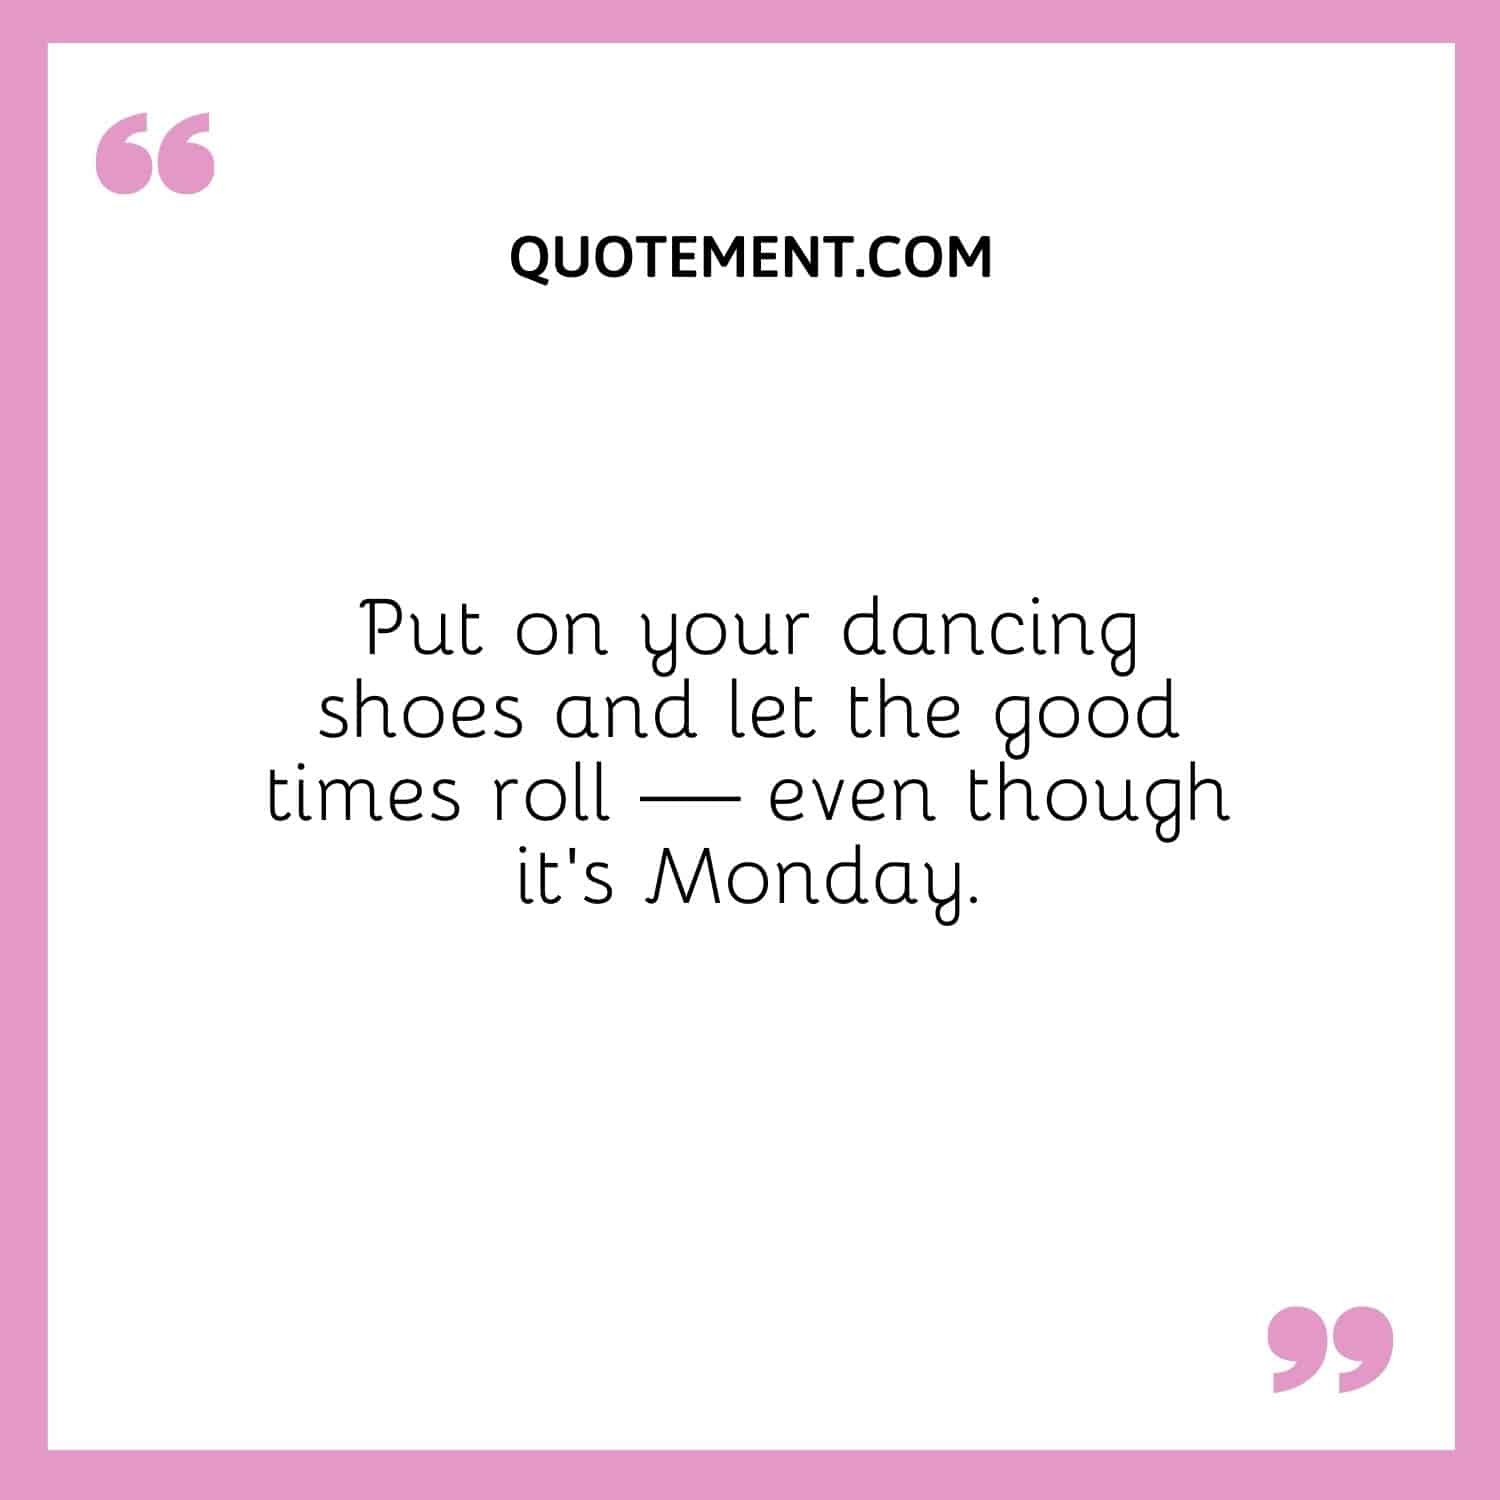 Put on your dancing shoes and let the good times roll